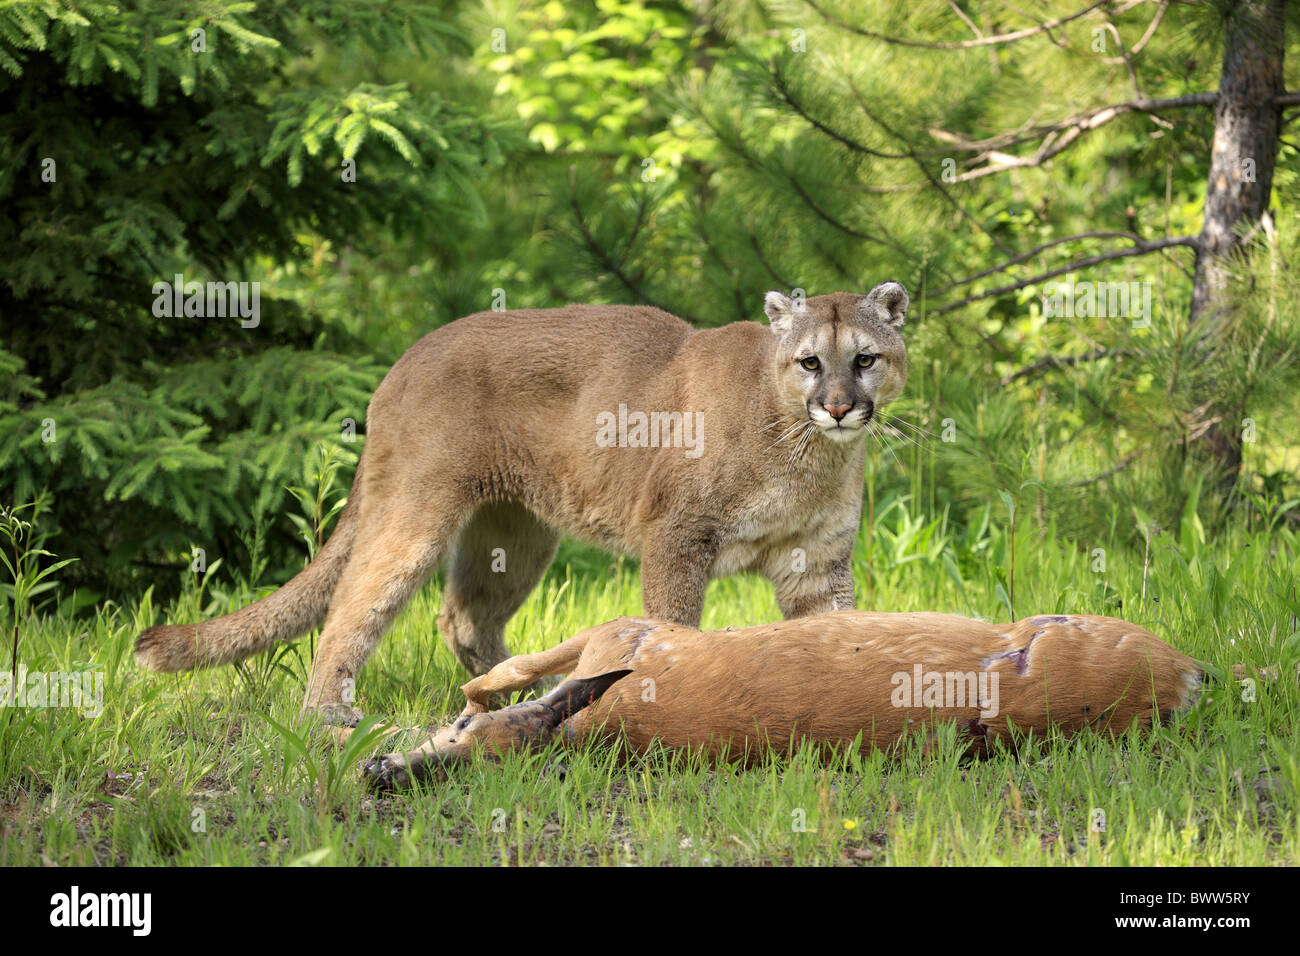 Puma Feeding High Resolution Stock Photography and Images - Alamy